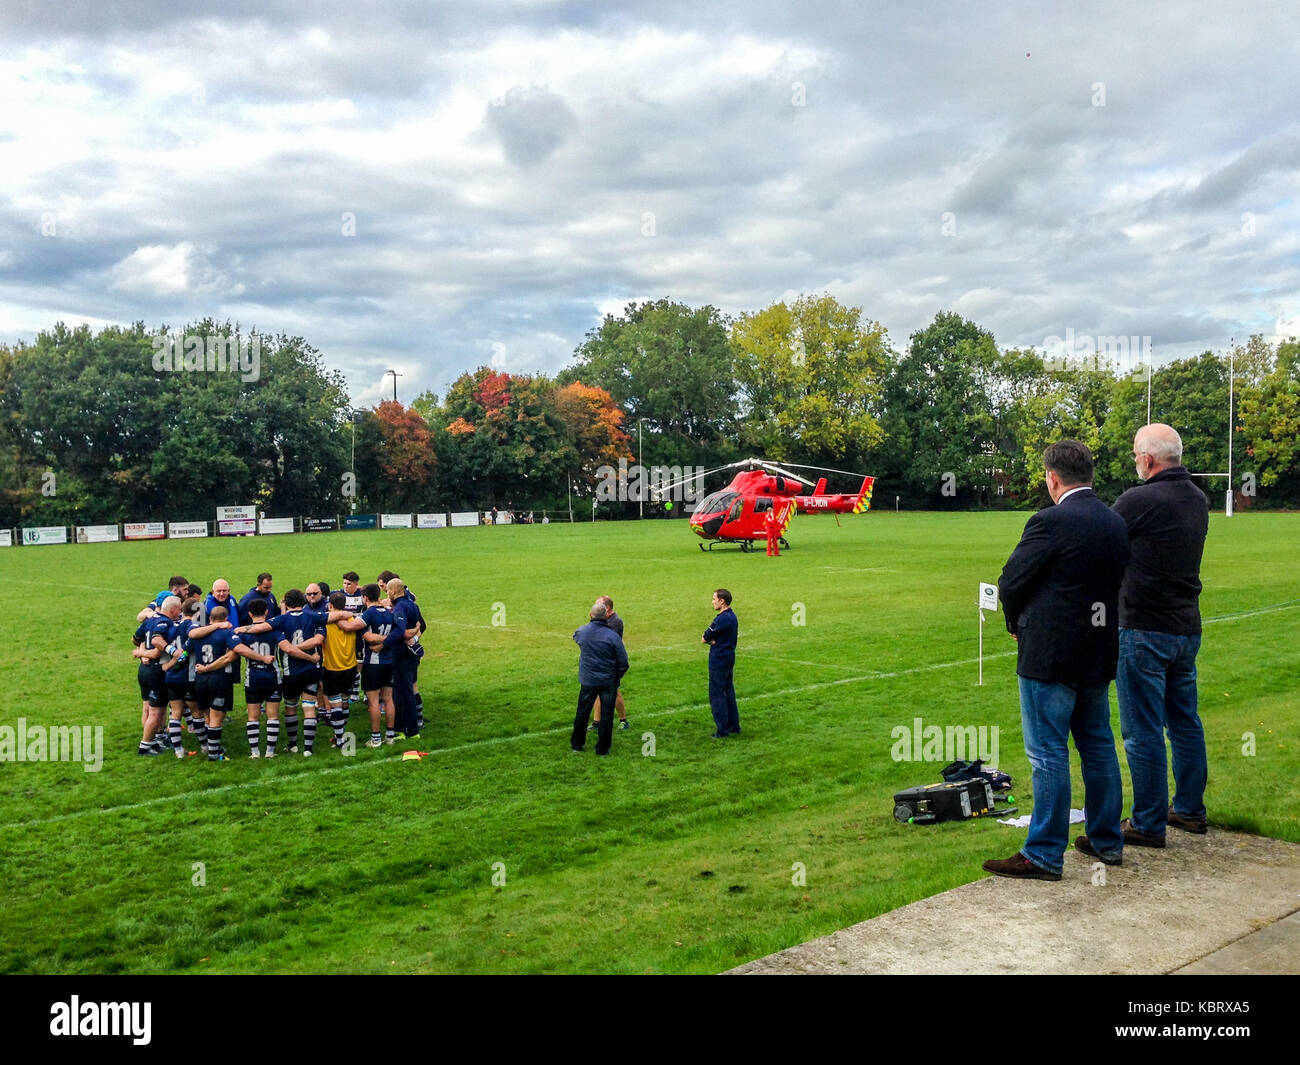 Woodford Green, London, UK. 30th September 2017. Officials look on as London’s  Air Ambulance helicopter G-LNDN lands at Woodford Rugby Football Club's Highams ground in Woodford Green in response to a report of a spectator suffering a heart attack. The Woodford v Chelmsford match was suspended for 40 minutes whilst paramedics attended to the casualty who was able to leave by road.  Woodford went on to win the match. The Air Ambulance is supported by London Freemasons.  Credit: Mark Dunn/ Alamy Live News Stock Photo